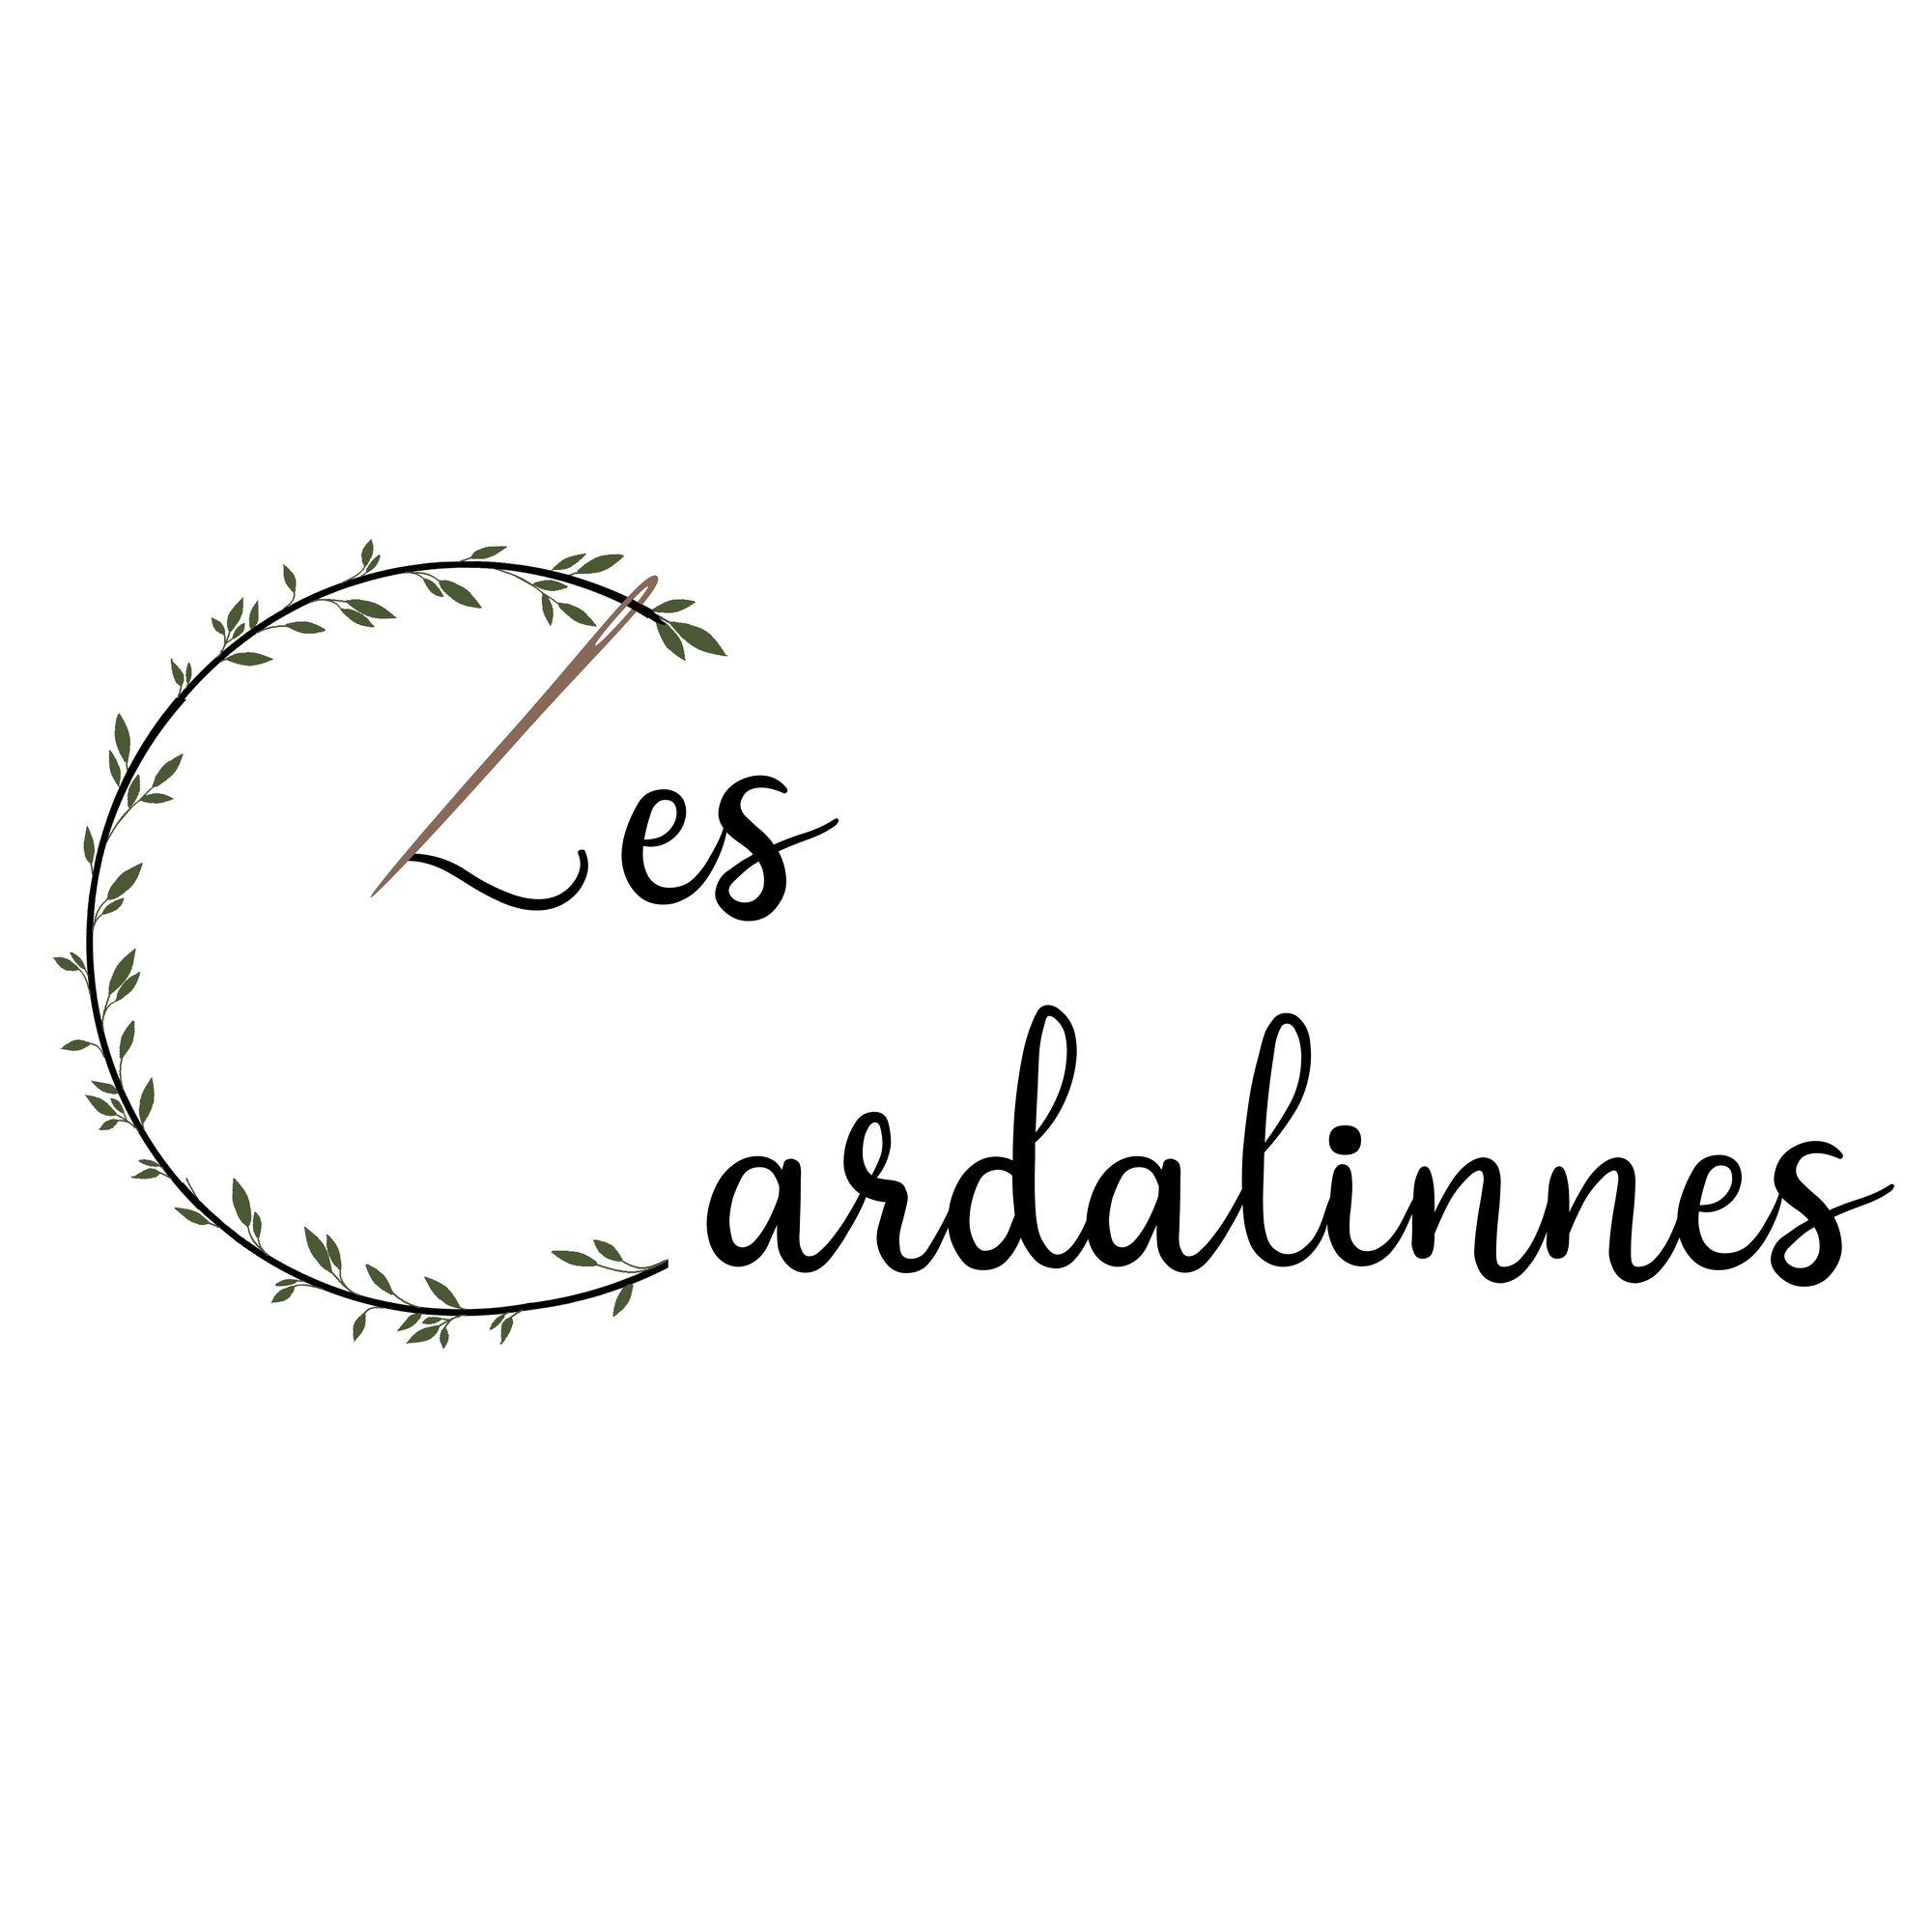 Les cardalines